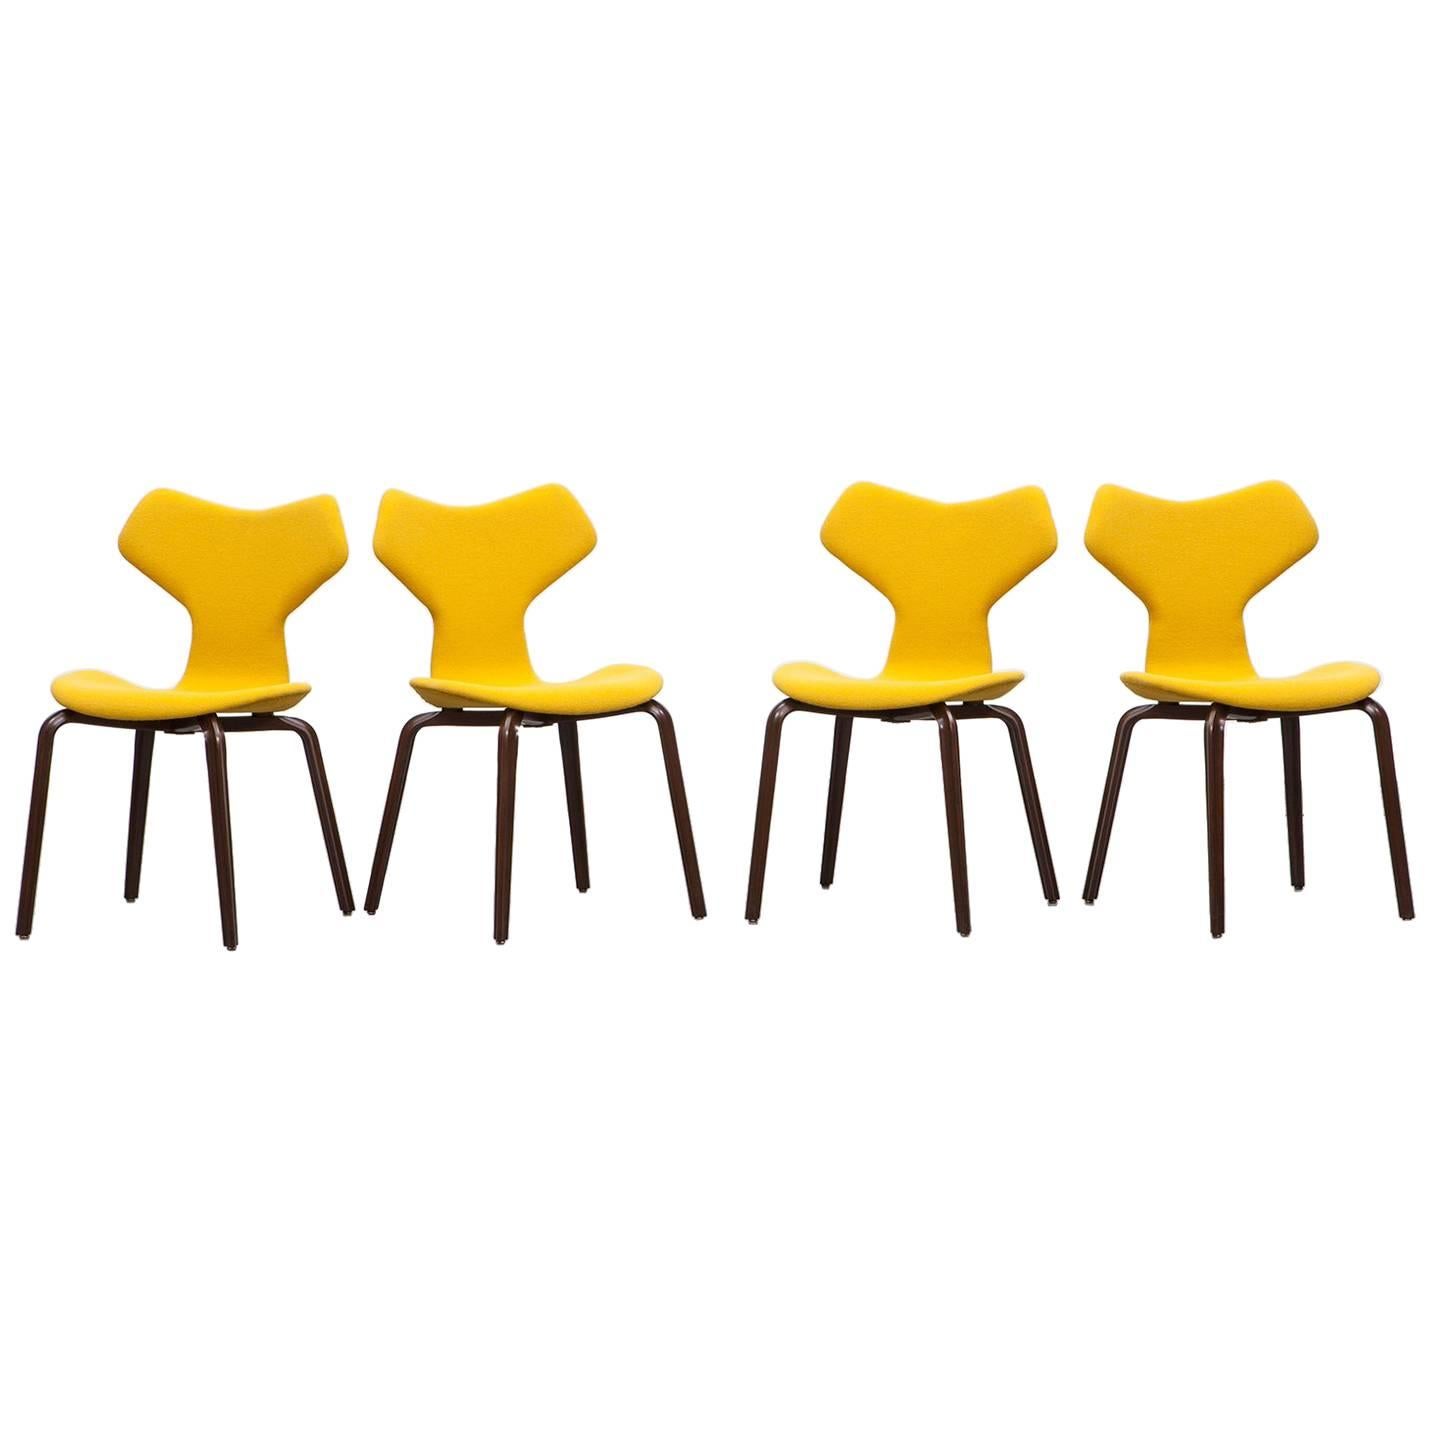 1950s Yellow Upholstery, set of four Plywood Chairs by Arne Jacobsen For Sale